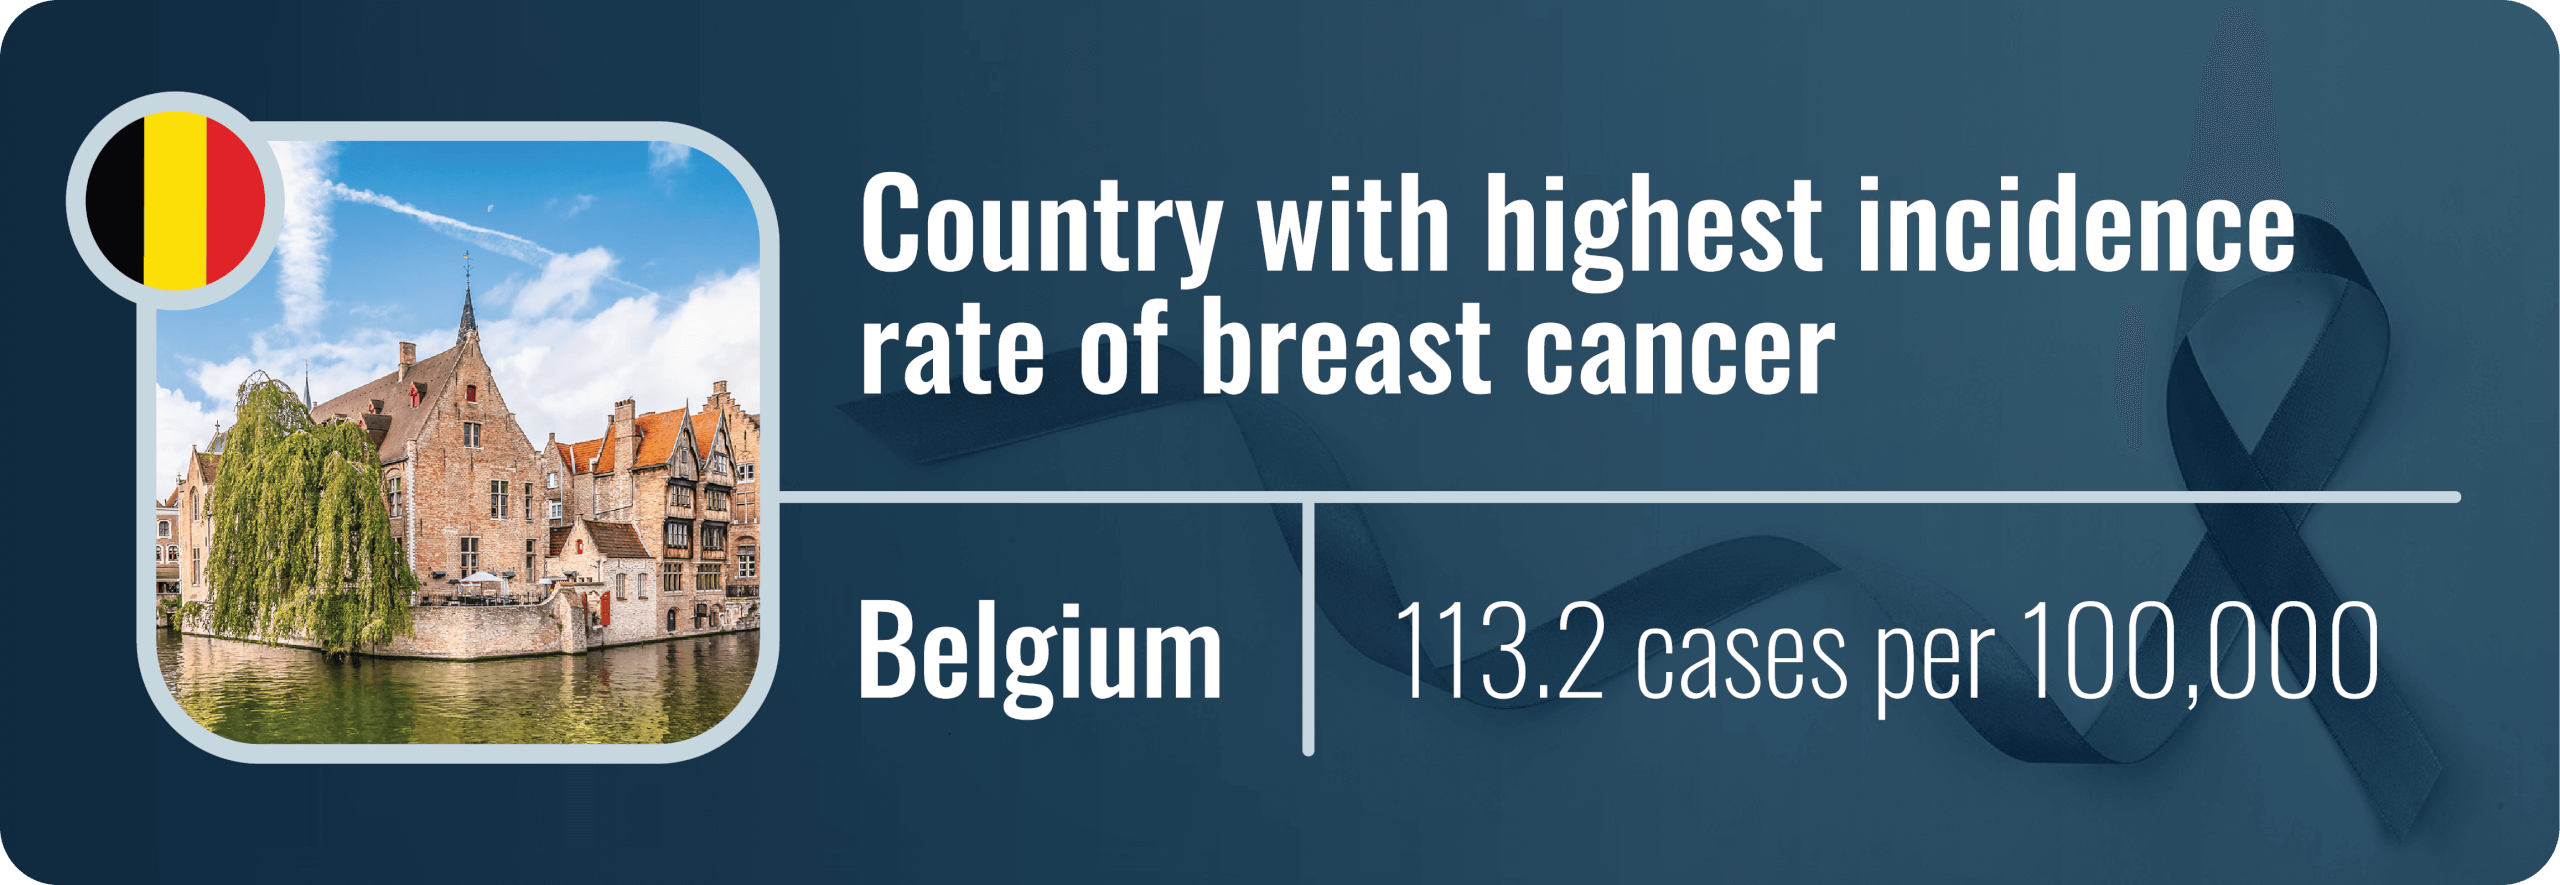 An infographic showing the country with the highest breast cancer rate